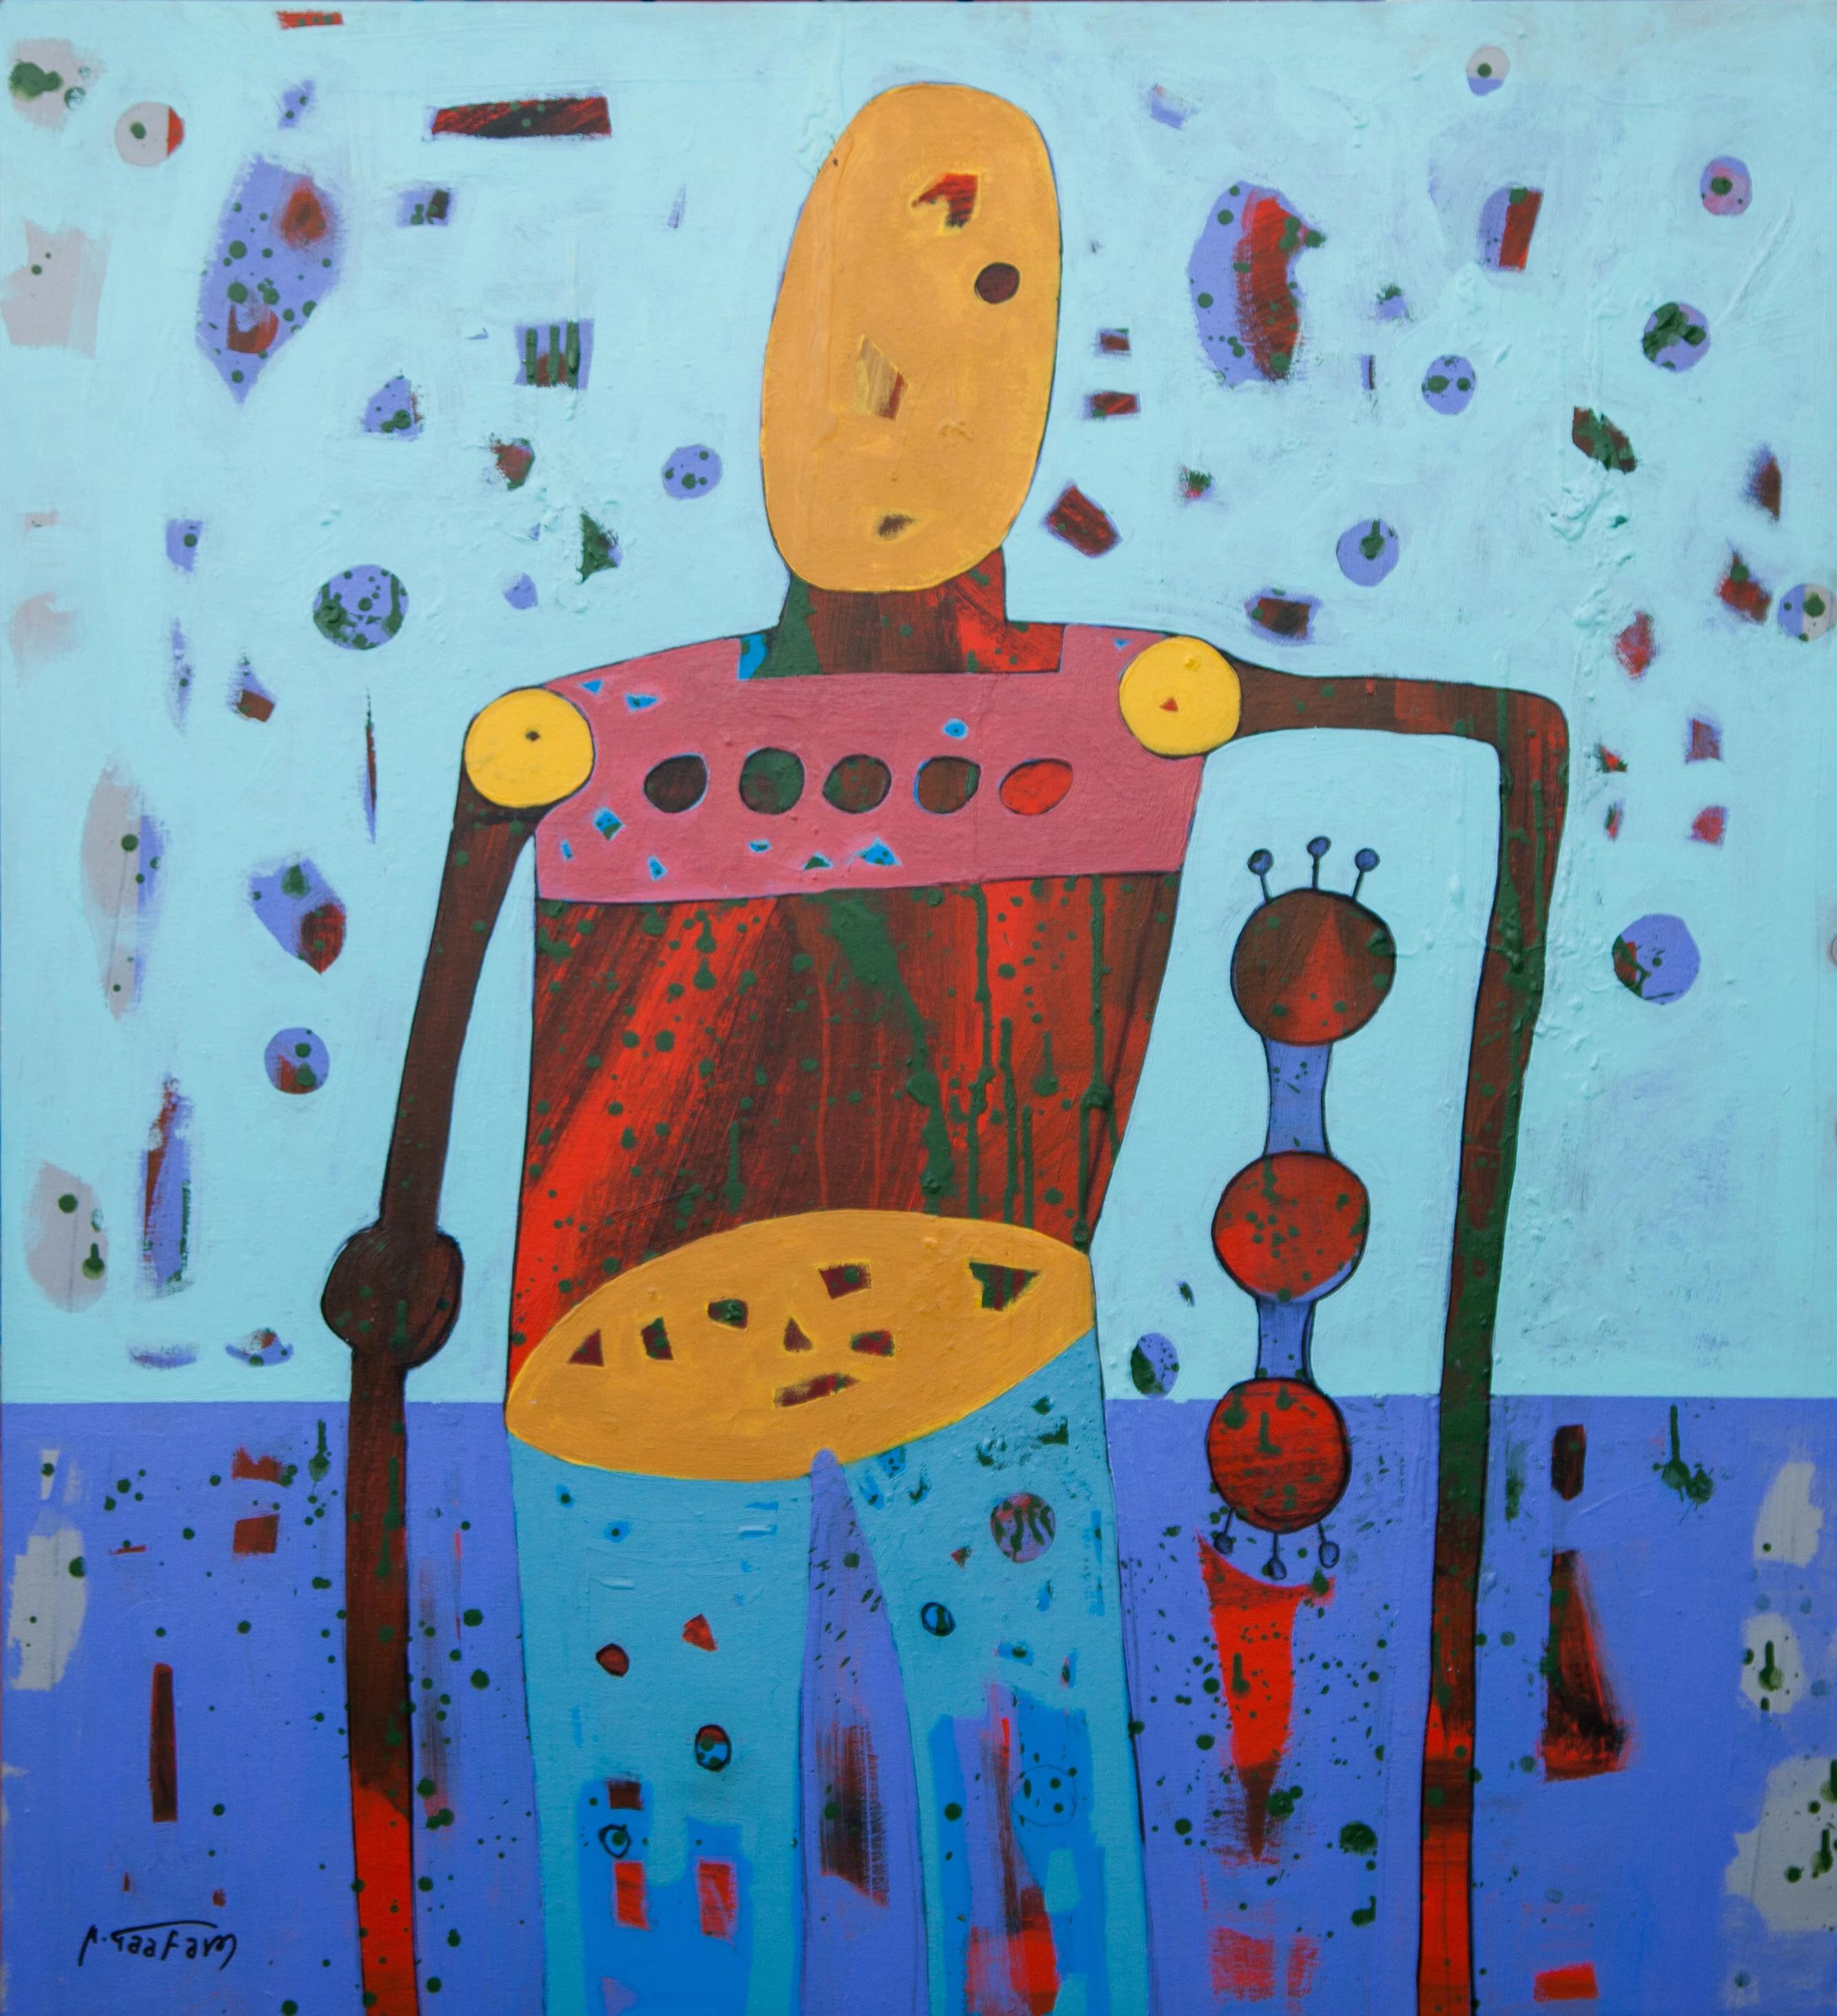 "Bionic Figure III" Acrylic & Oil pastel Painting 43" x 39" in by Ahmed Gaafary

Born In Cairo 1987 Where He Currently Lives And Works. He Received His Bachelor’s Degree In Information Systems In 2008 From The Higher Institute Of Advanced Studies